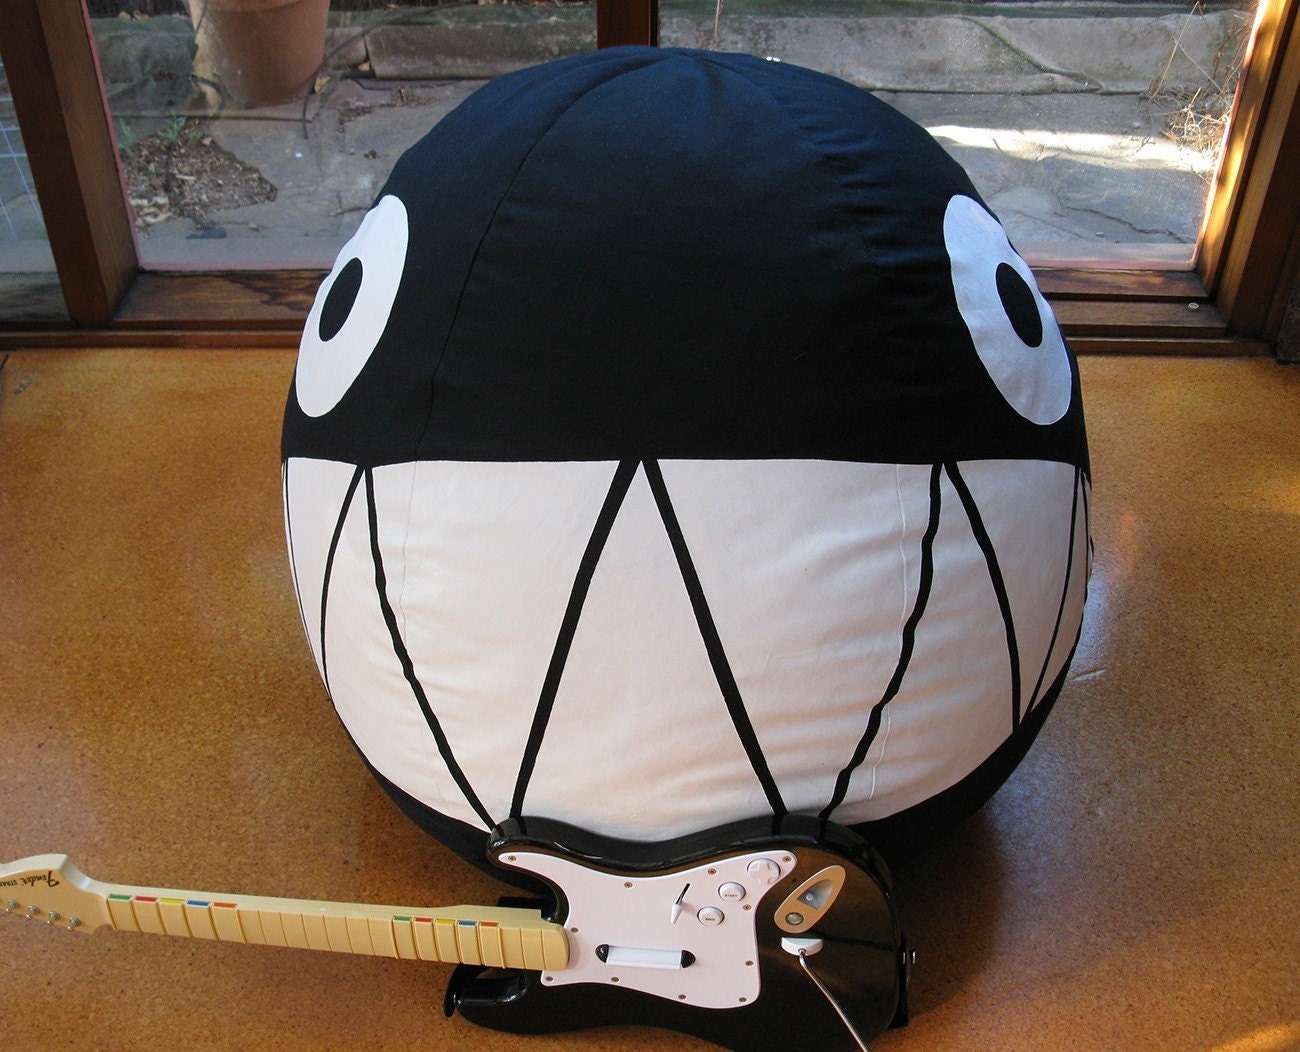 Mega Chain Chomp bean bag - Mario Bros - THIS ITEM IS MADE TO ORDER - ALLOW 4 WEEKS FOR COMPLETION